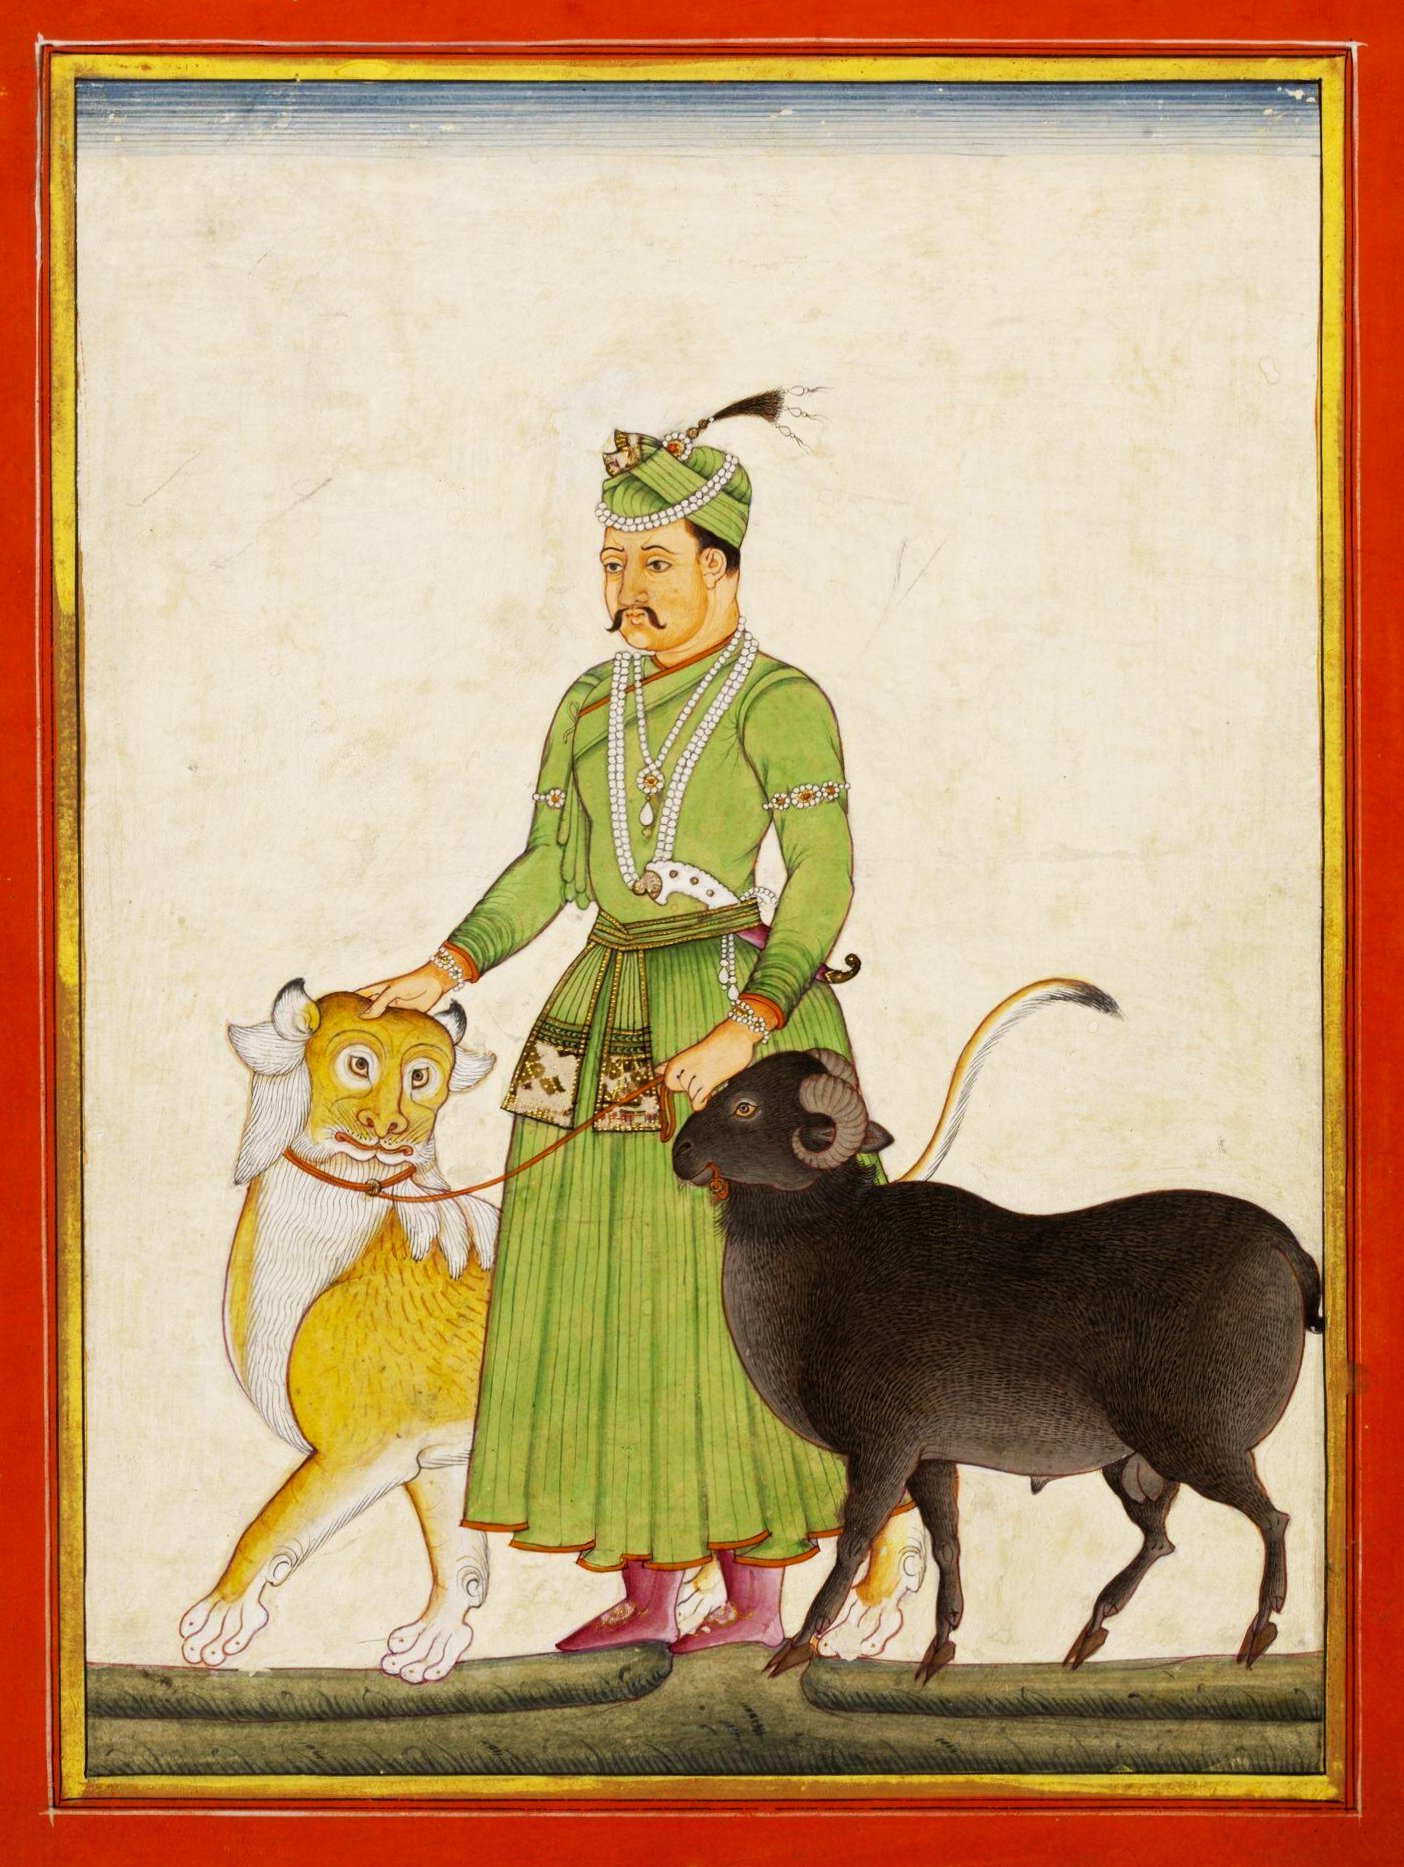 Opaque watercolor painting on paper showing Mughal Emperor Akbar, dressed in green robes with a golden embroidered belt and matching turban, guiding a lion and a ram on leashes.